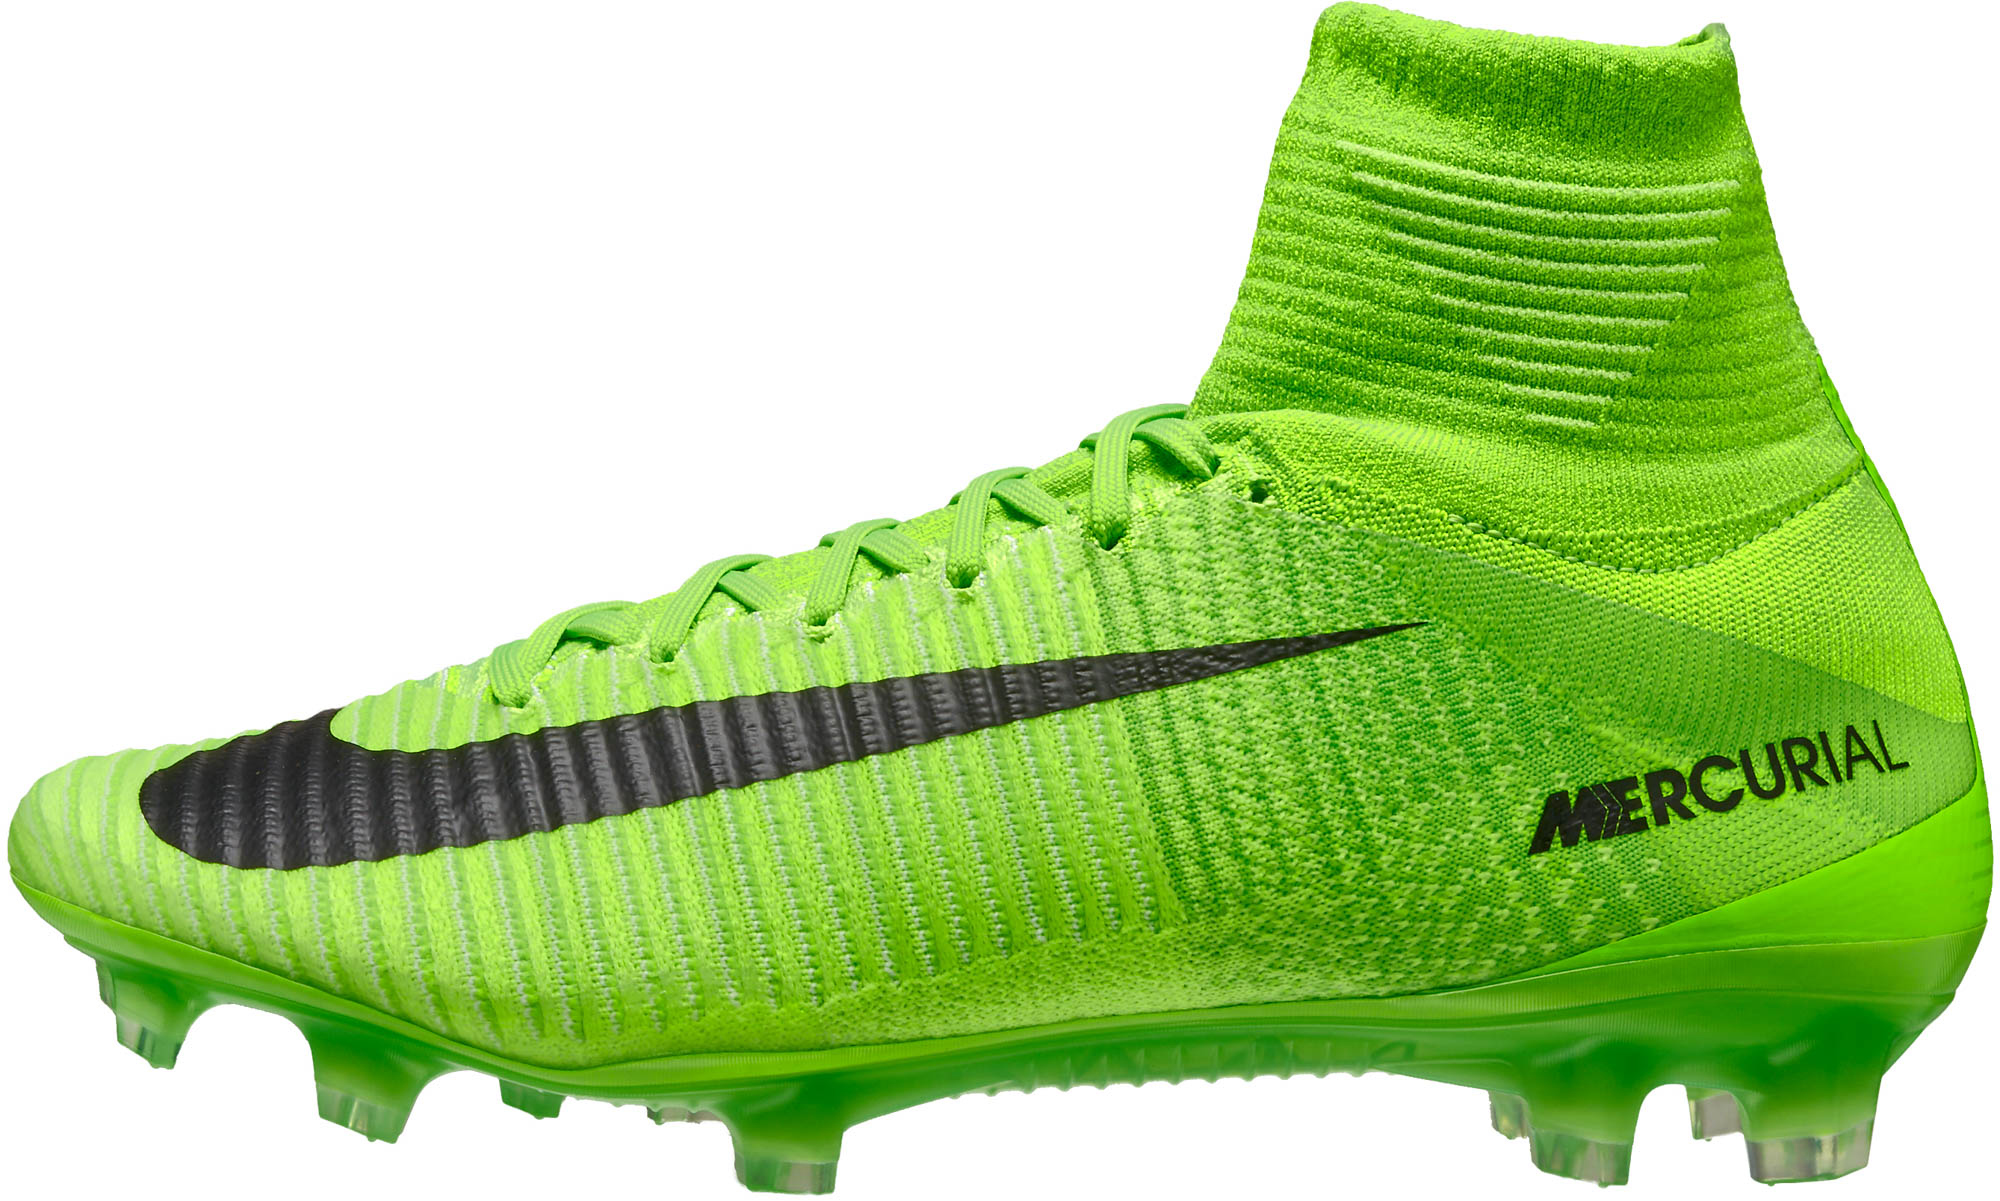 dier krom ring Nike Mercurial Superfly V FG - Green Superfly Cleats